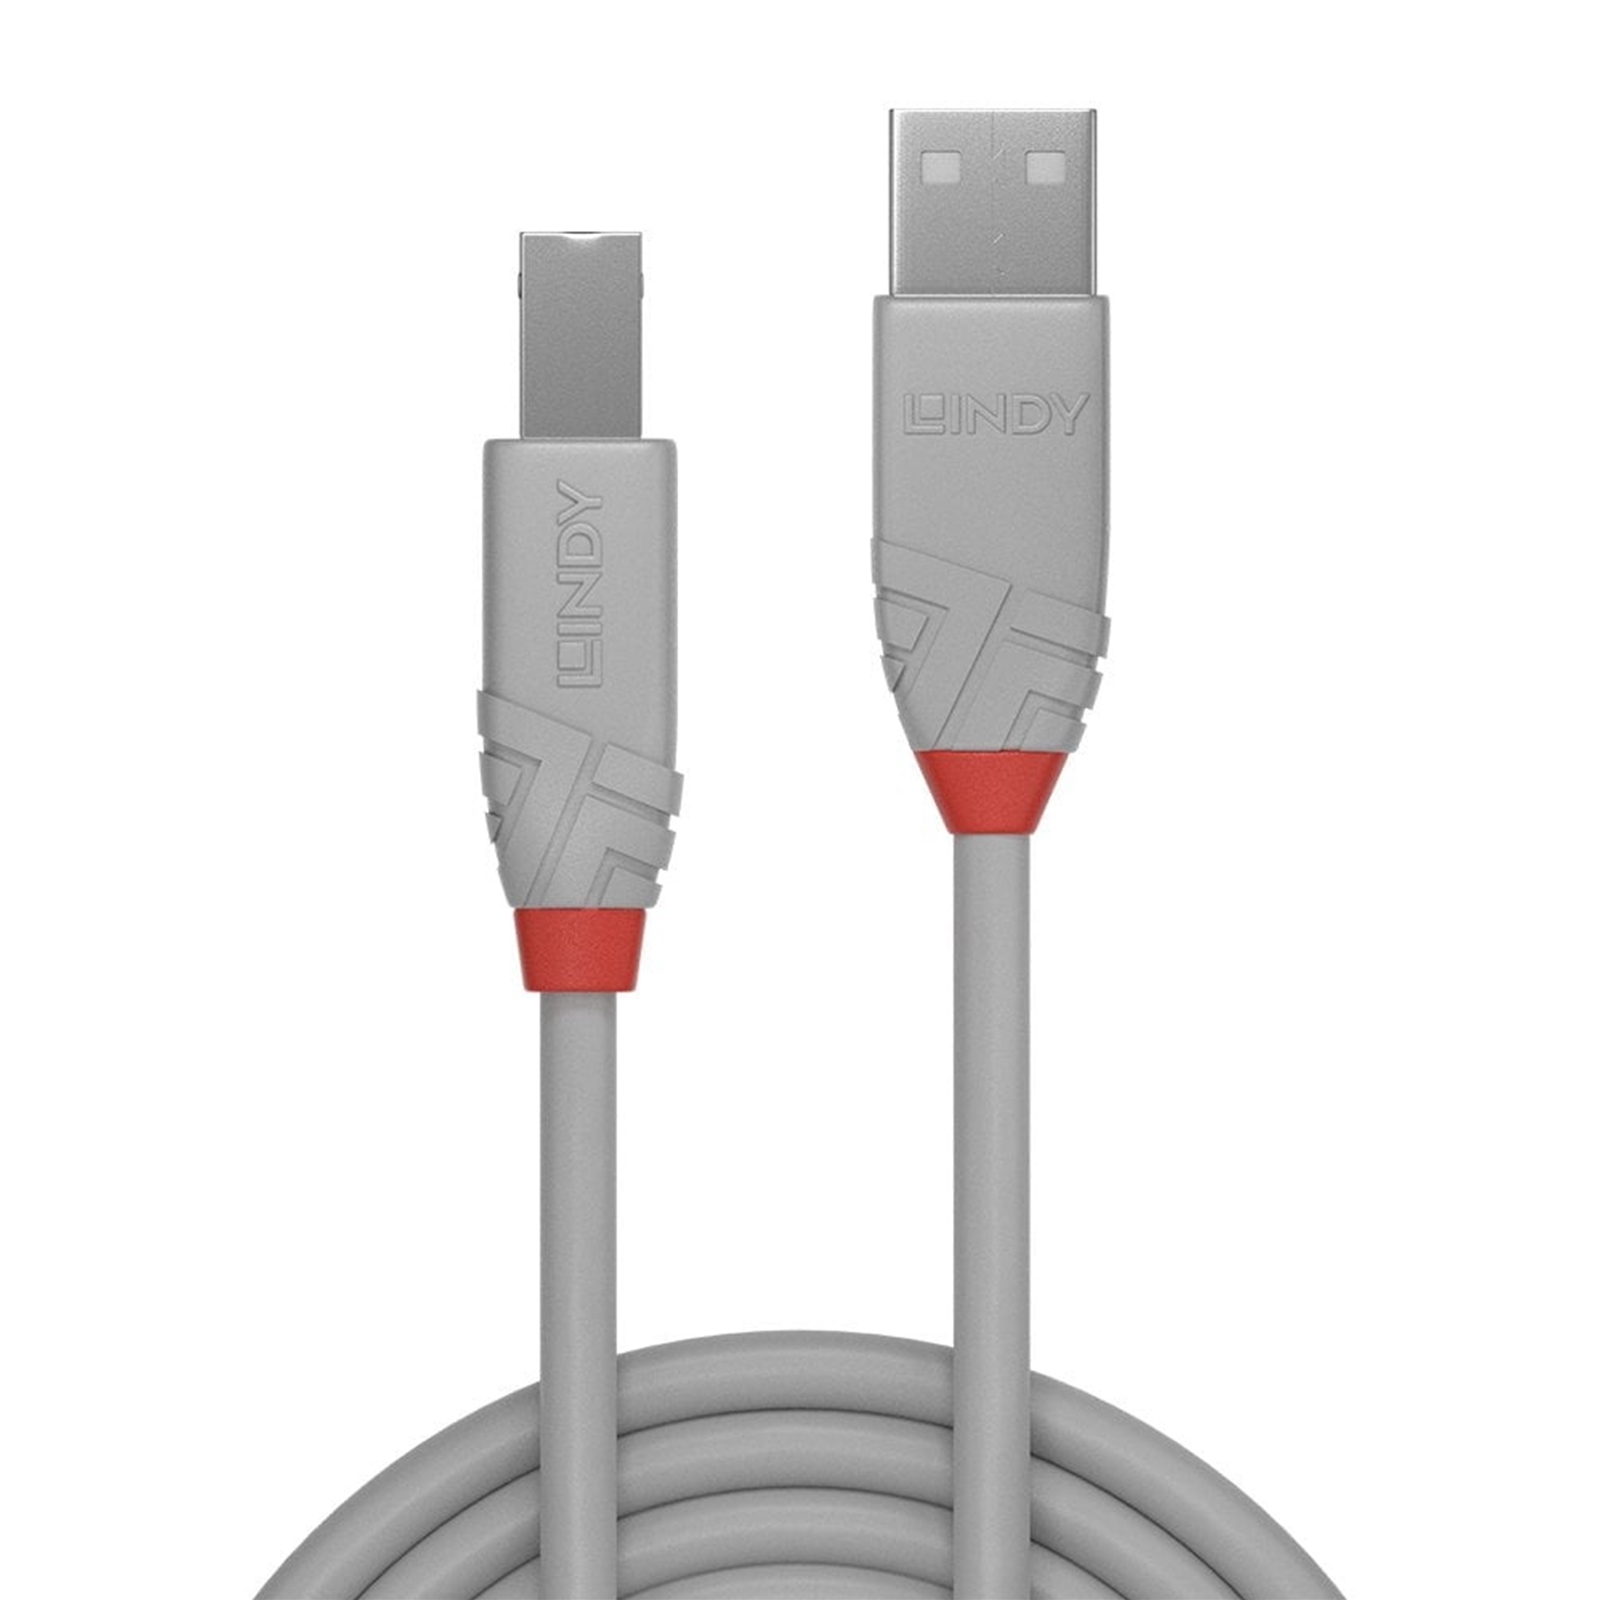 LINDY 36684 Anthra Line USB Cable, USB 2.0 Type-A (M) to USB 2.0 Type-B (M), 3m, Grey, Supports Data Transfer Speeds up to 480Mbps, Robust PVC Housing, Nickel Connectors & Gold Plated Contacts, Retail Polybag Packaging